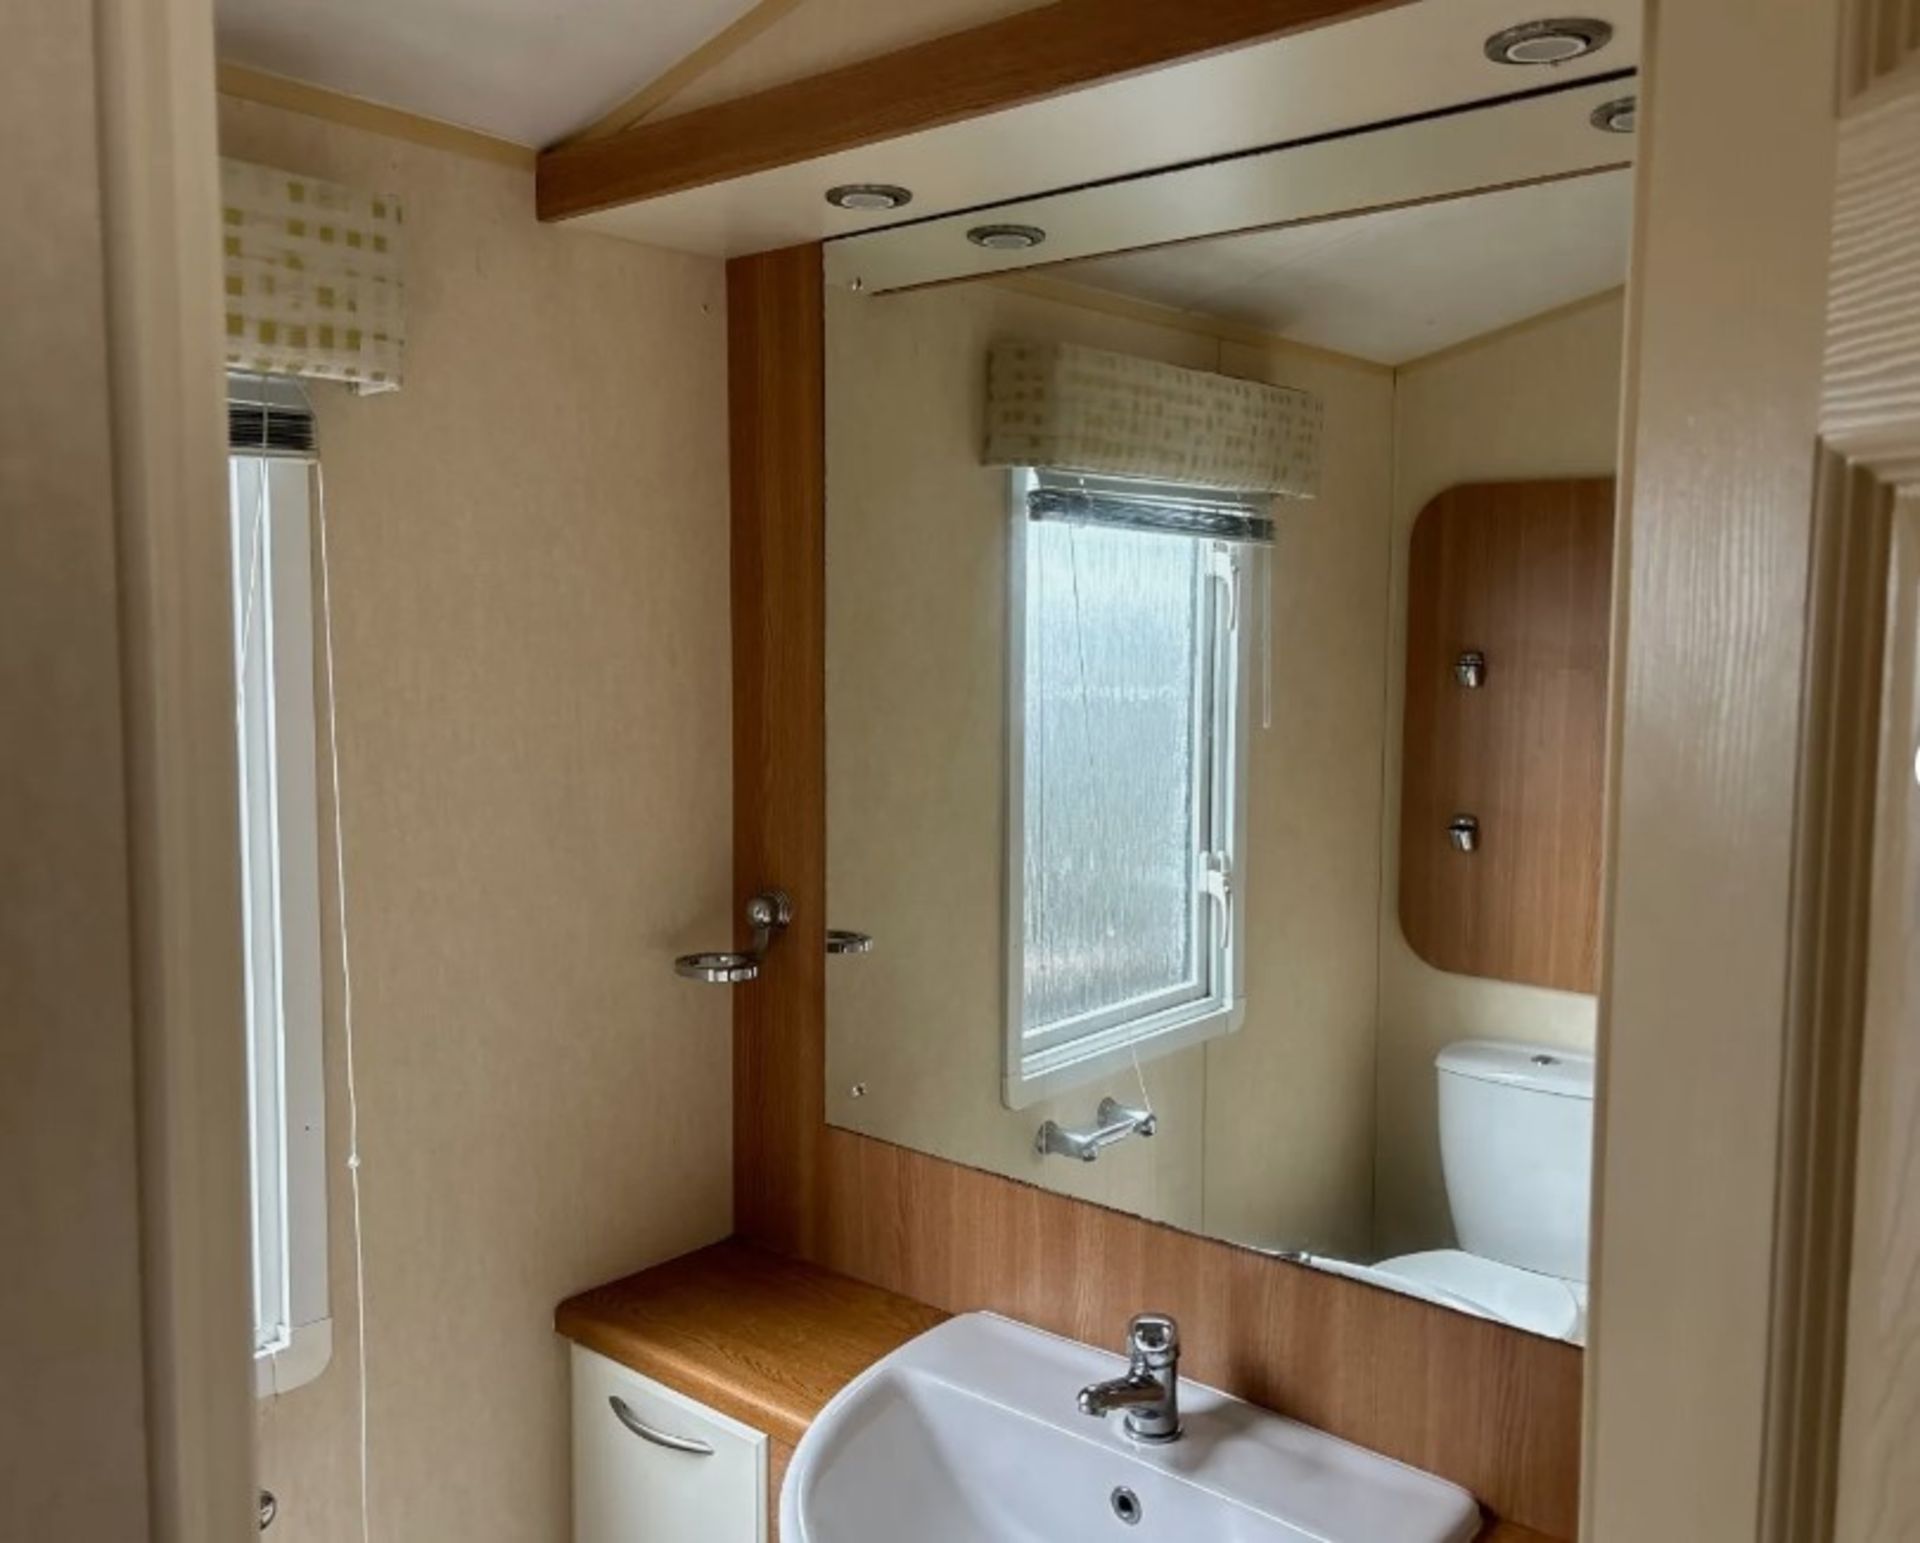 BK BLUEBIRD CAPRICE STATIC CARAVAN - YOUR GATEWAY TO MODERN LIVING AND COMFORT - Image 17 of 24